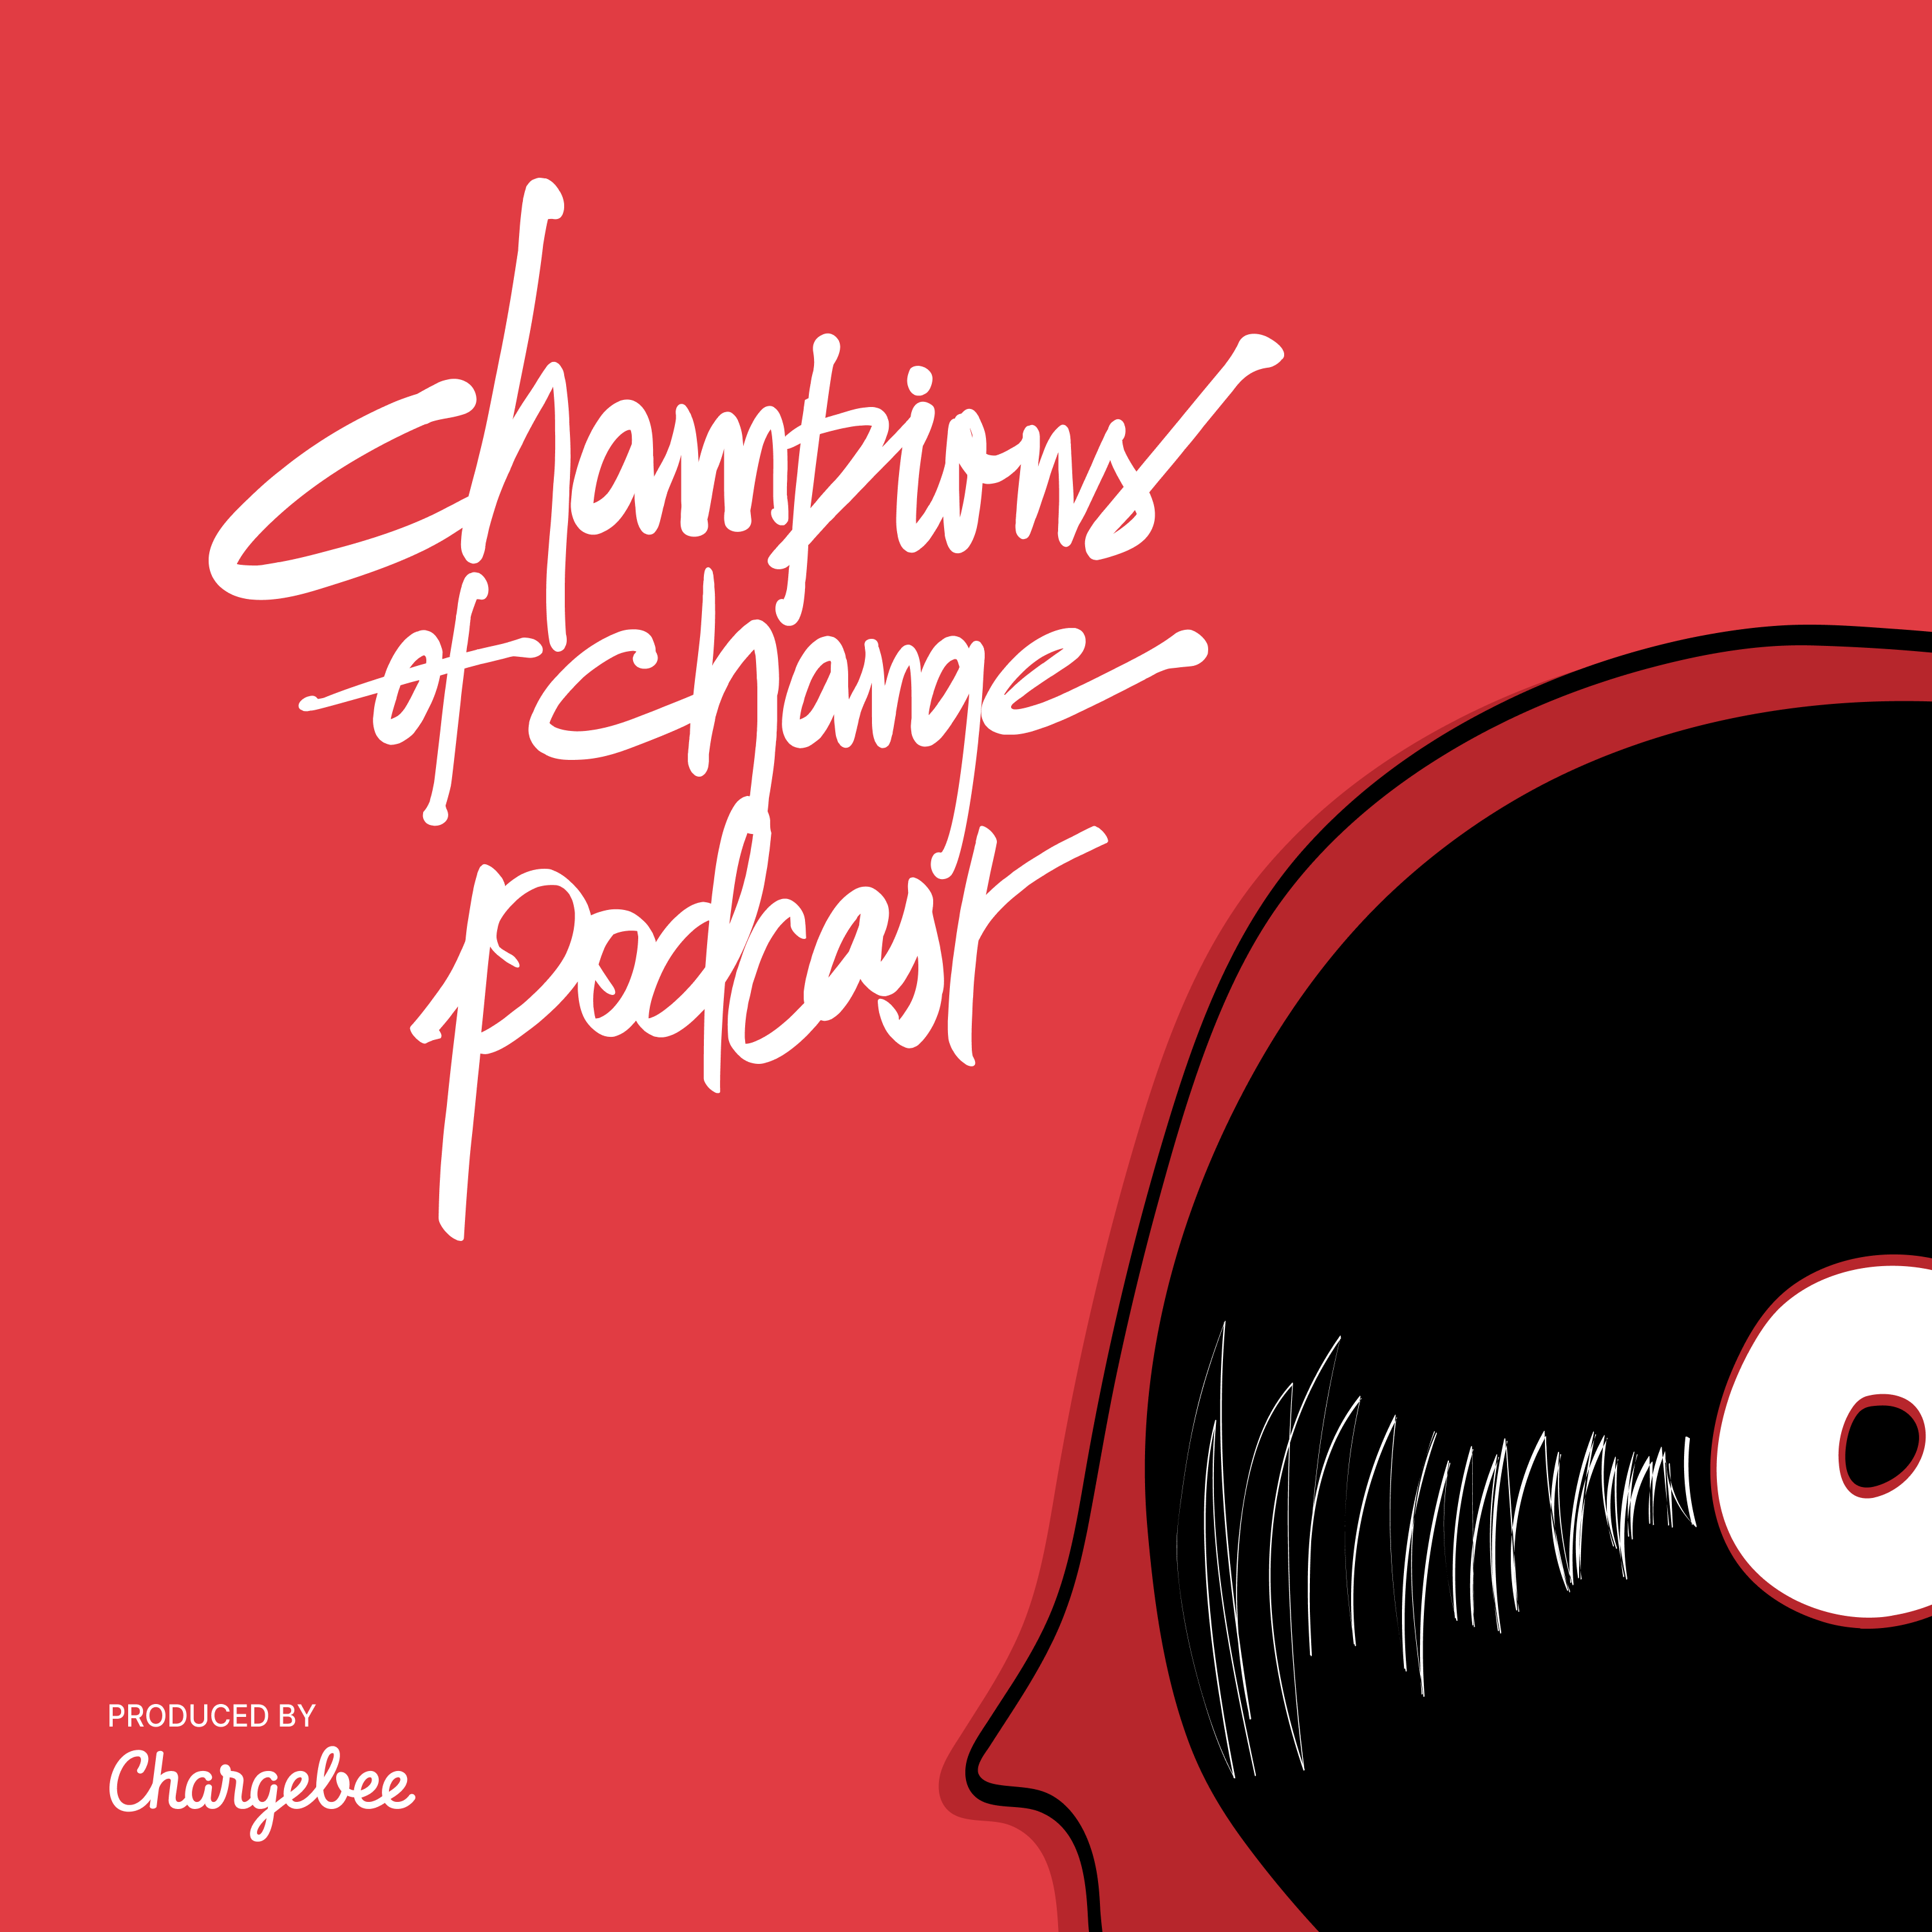 Artwork for Chargebee's Champions of Change Podcast